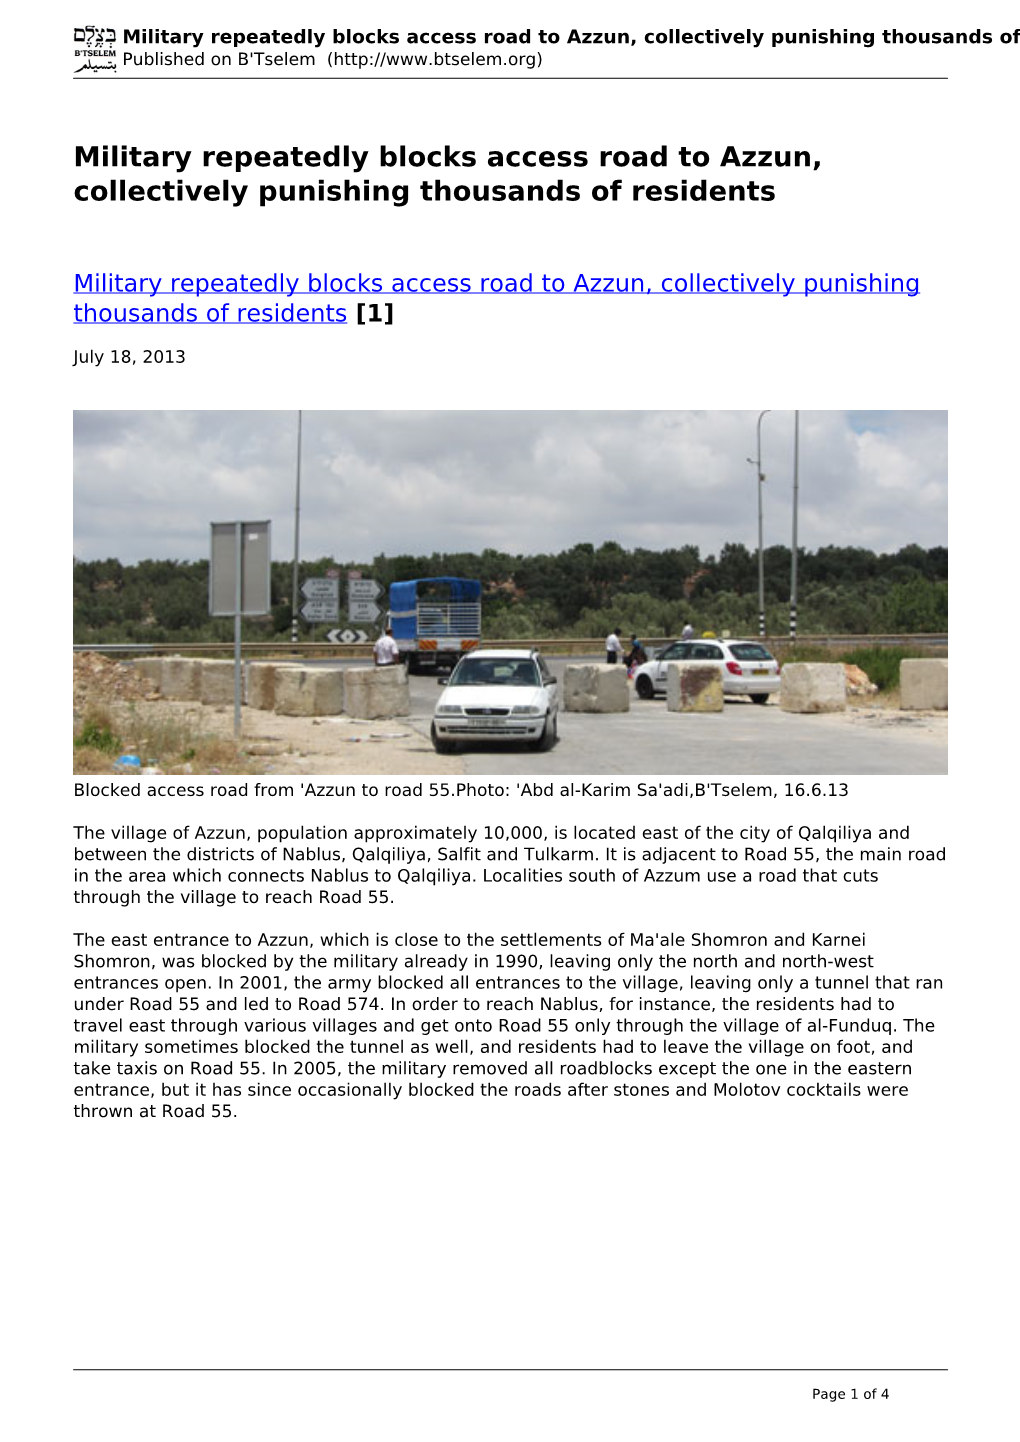 Military Repeatedly Blocks Access Road to Azzun, Collectively Punishing Thousands of Residents Published on B'tselem (